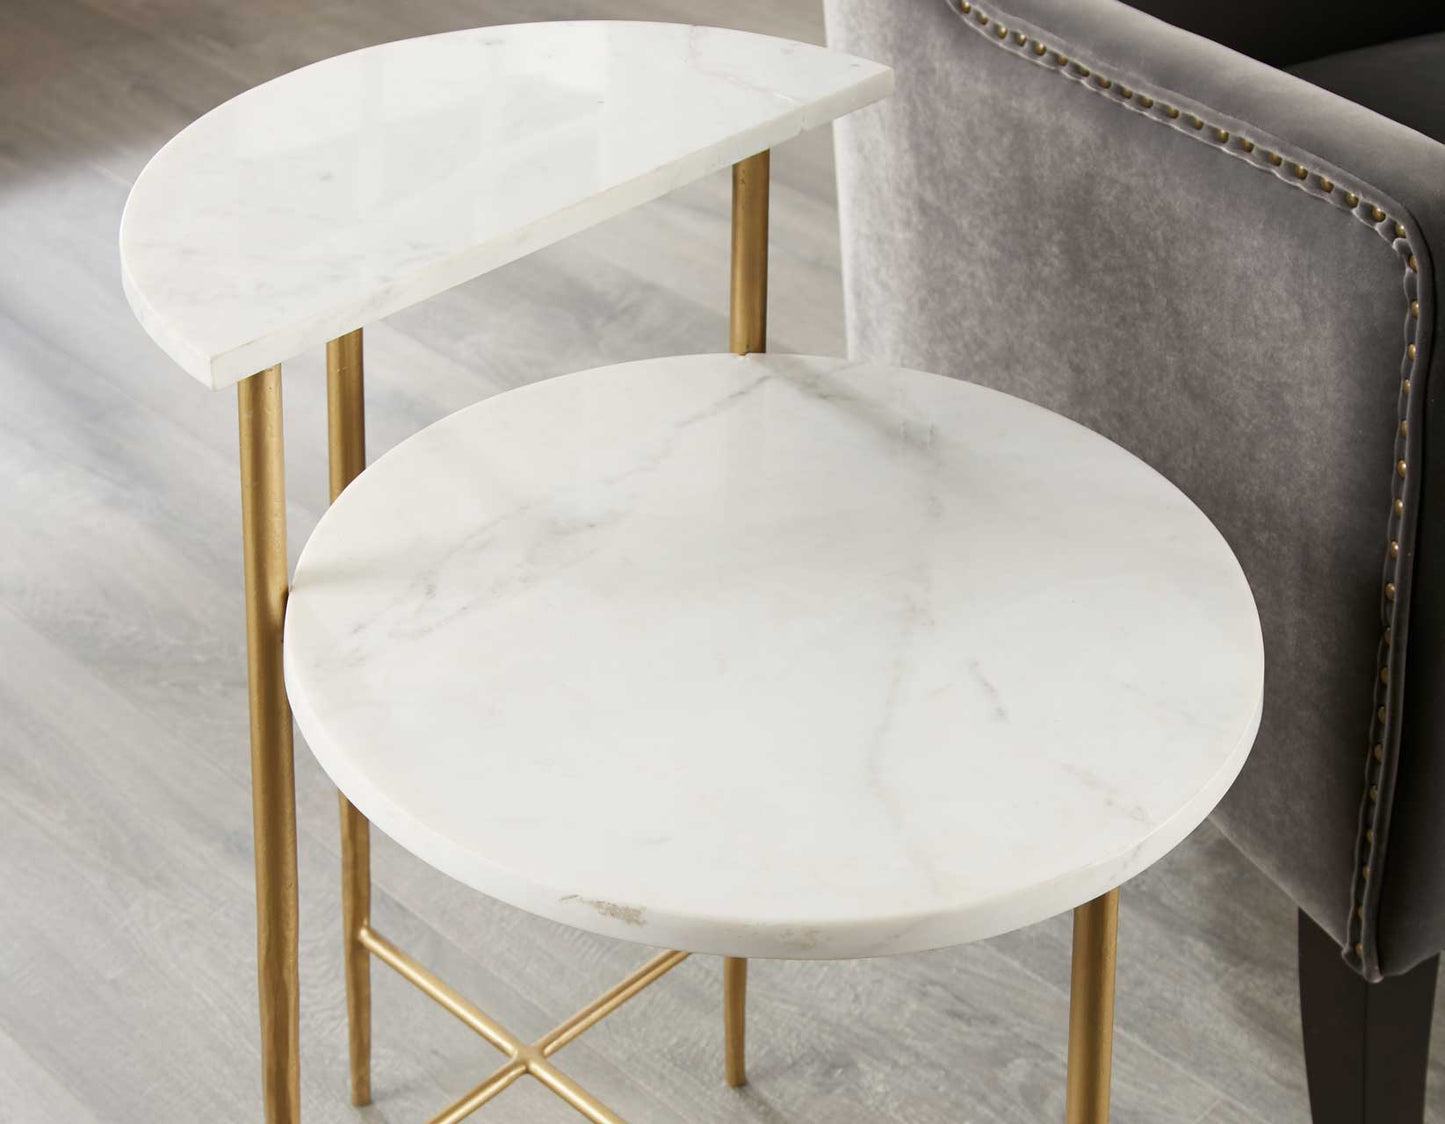 Patna White Marble Top Table